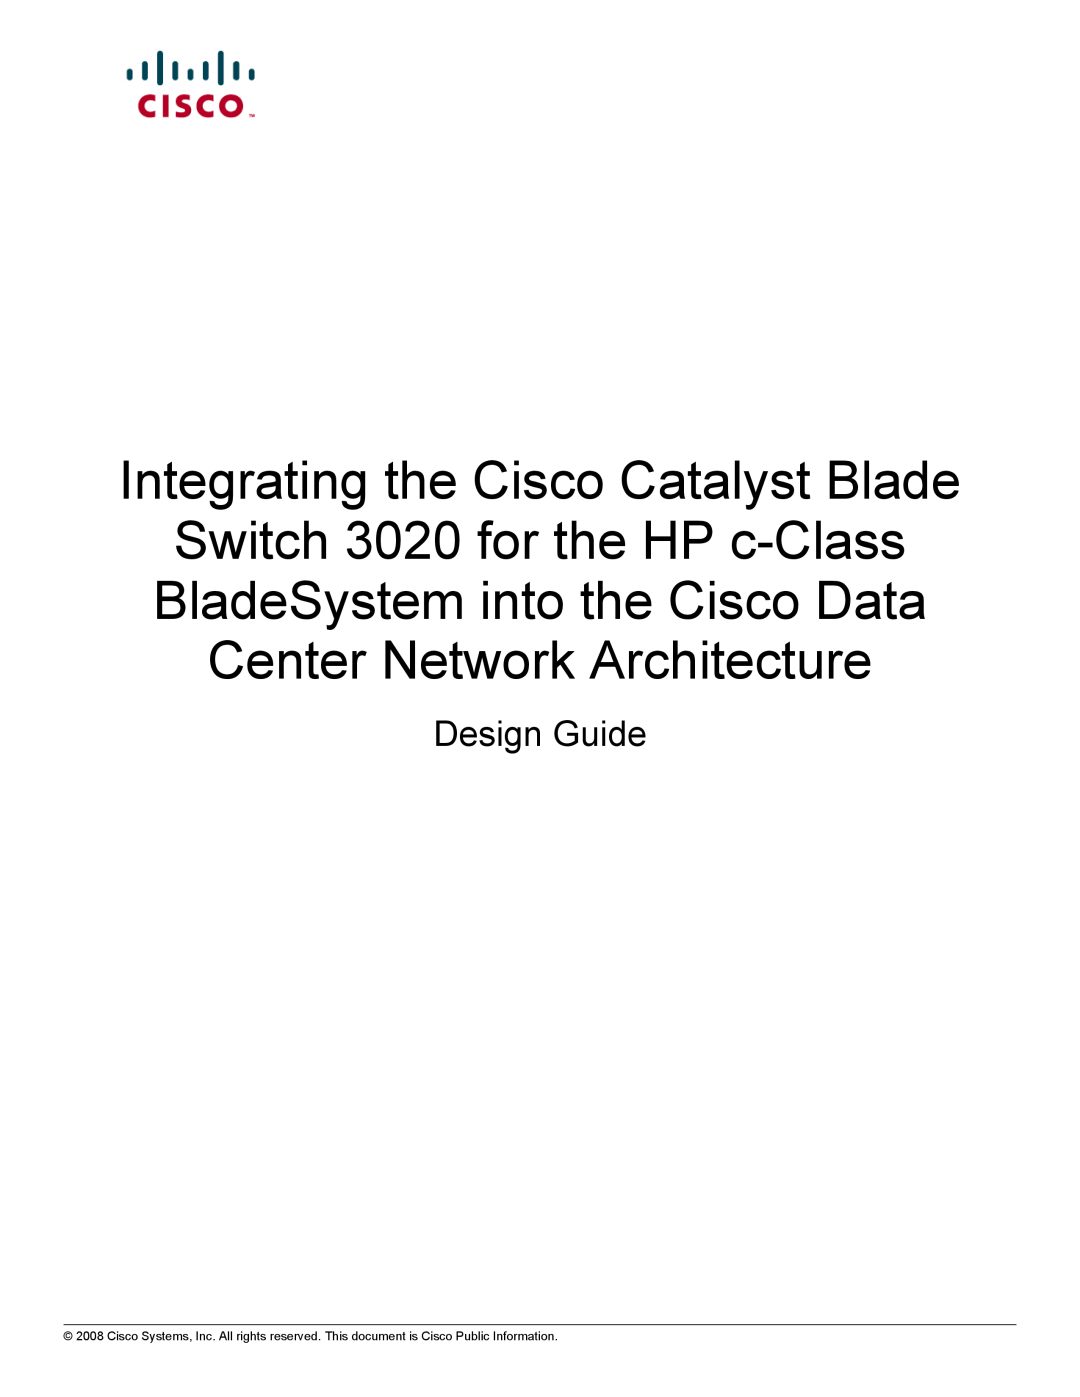 NAD manual Integrating the Cisco Catalyst Blade, Switch 3020 for the HP c-Class, BladeSystem into the Cisco Data 